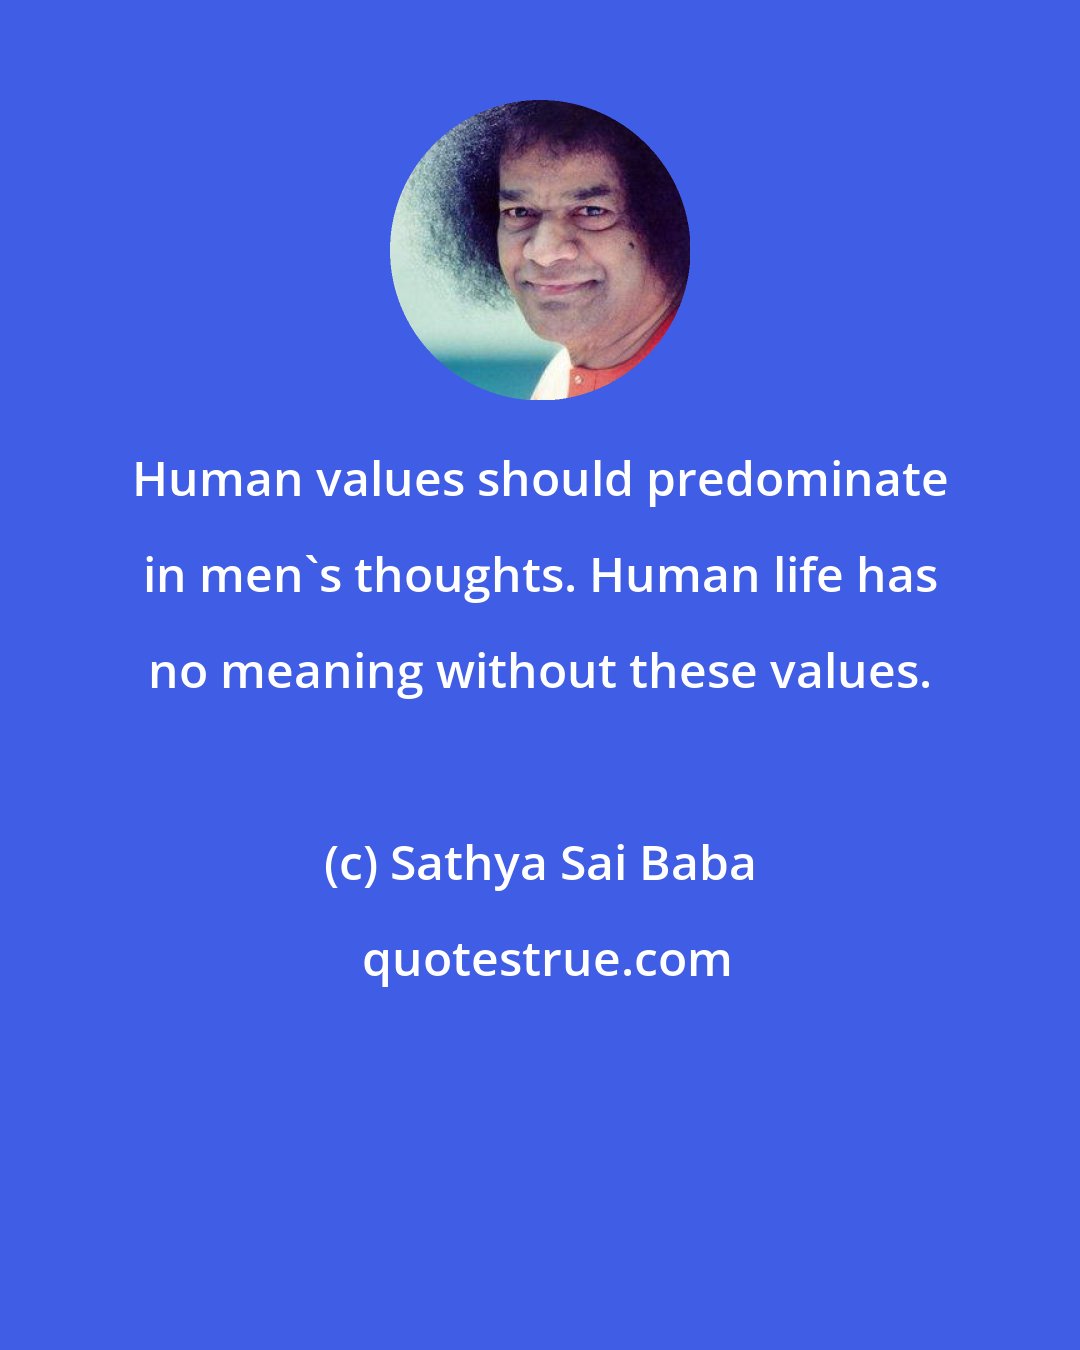 Sathya Sai Baba: Human values should predominate in men's thoughts. Human life has no meaning without these values.